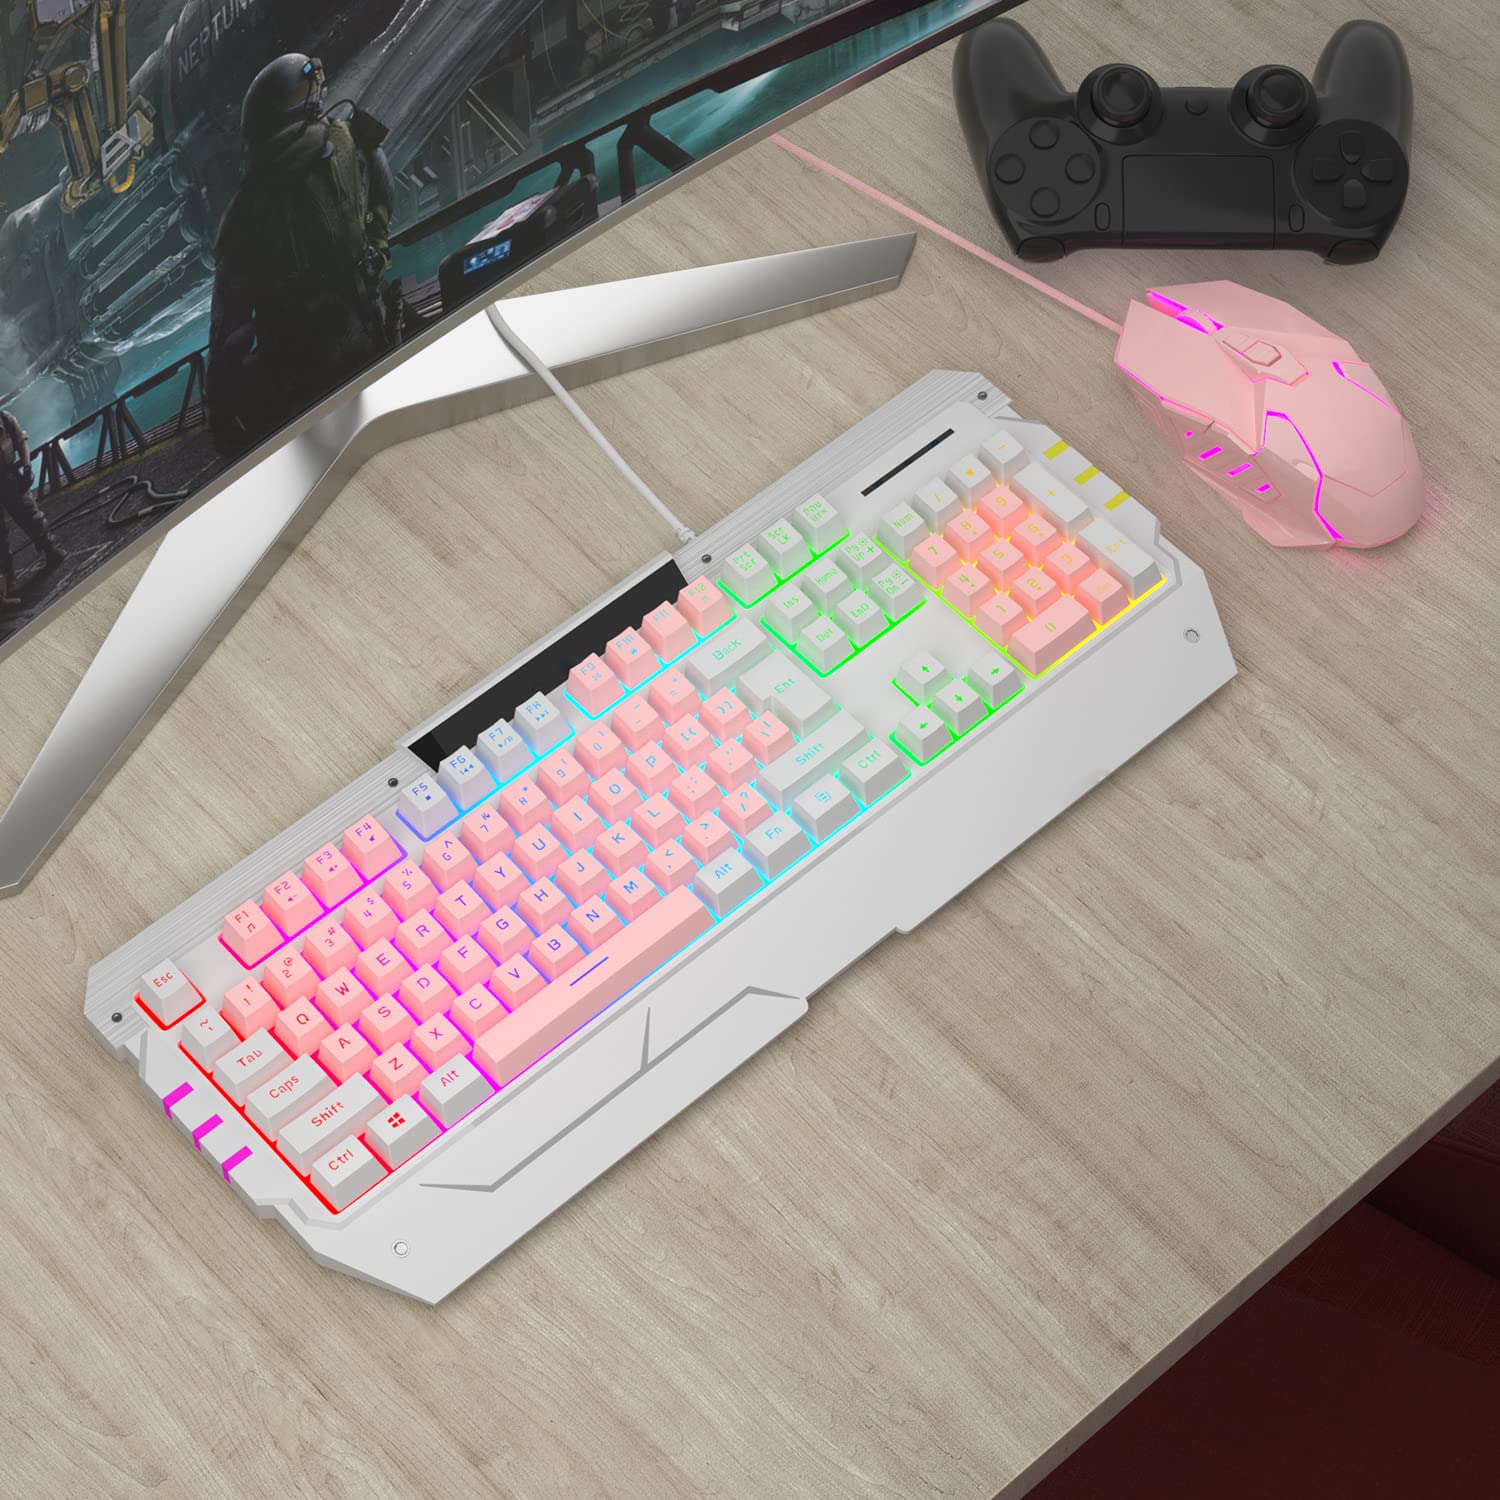 Pink Keybaord USB Gaming Keyboards and Mouse Combo, GT817 104 Key Rainbow Backlit Keyboard and Mouse Set, Computer Keyboard USB Wired Mouse for Windows PC Gamers (White & Pink)